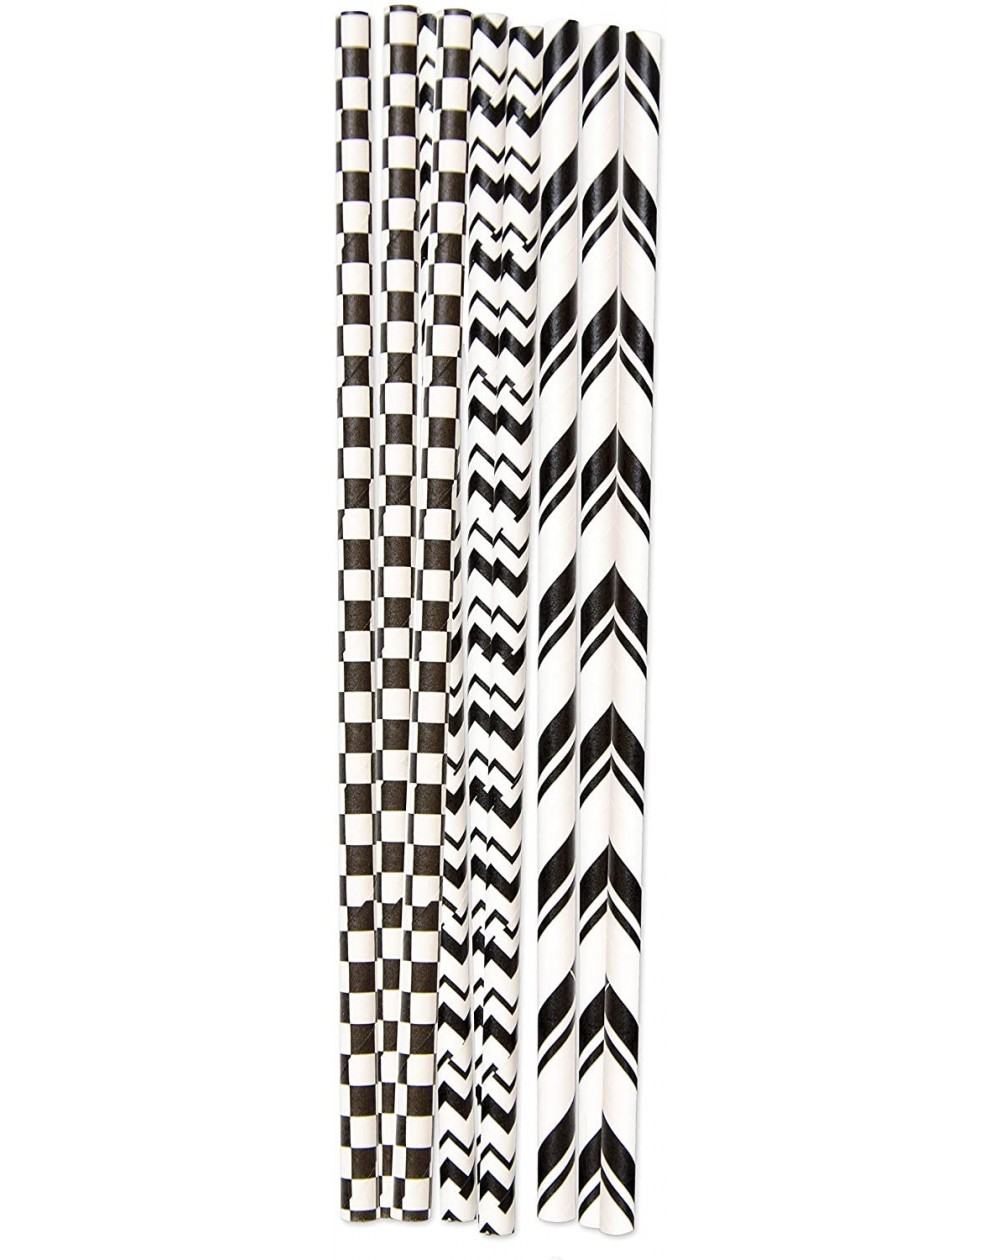 Tableware Party Supplies Straws- Black and White (24-Count) - Paper Straws - CT18L89KUL6 $16.33